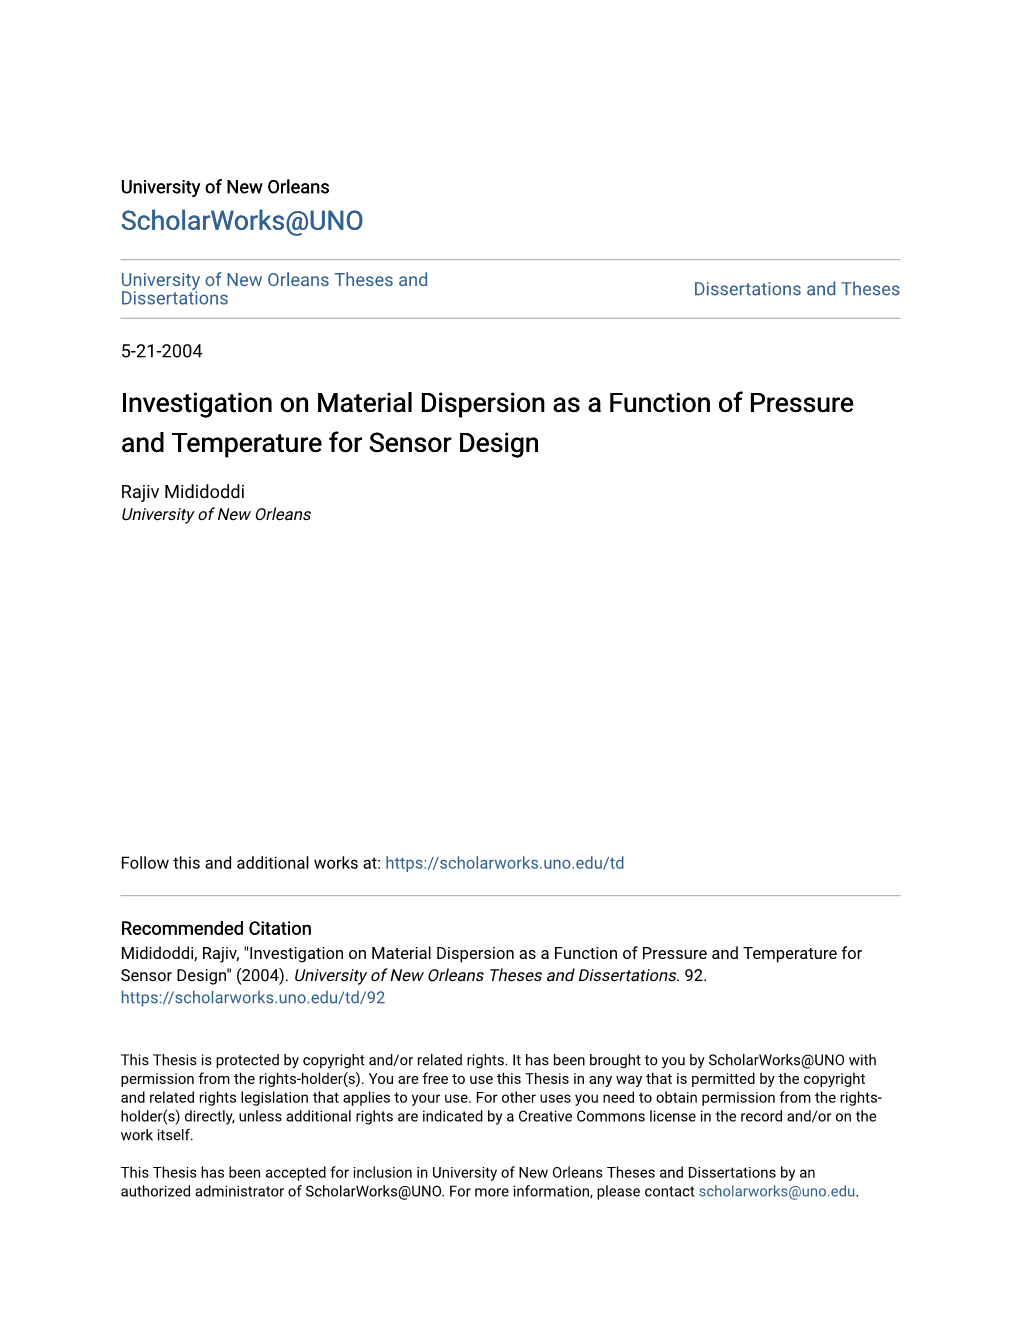 Investigation on Material Dispersion As a Function of Pressure and Temperature for Sensor Design